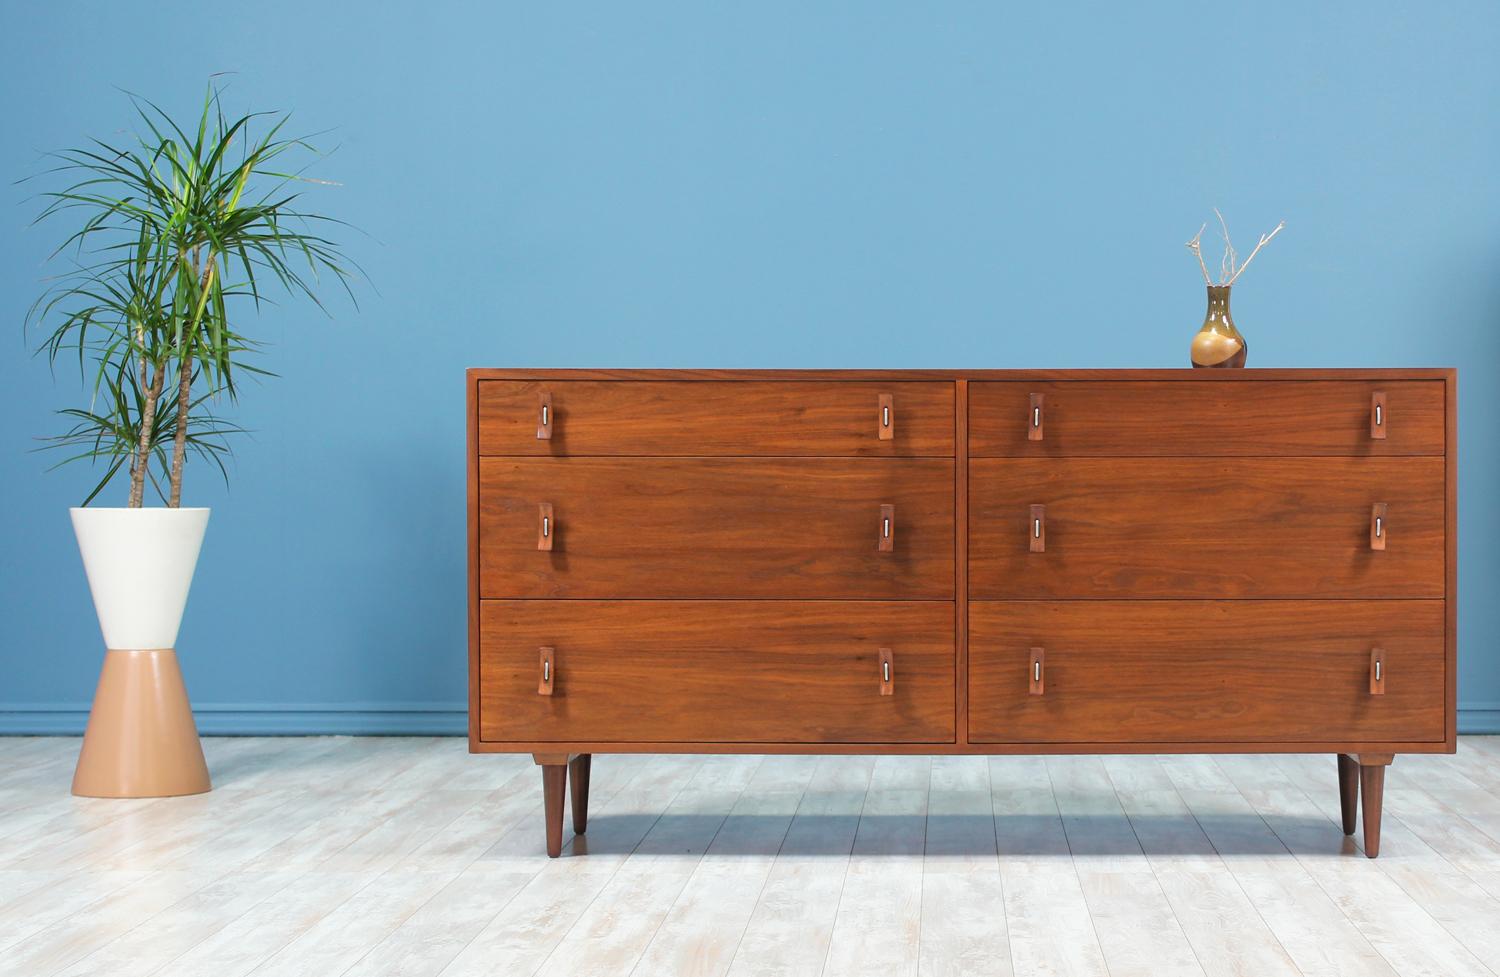 Designer: Stanley Young
Manufacturer: Glenn of California
Country of origin: United States
Date of manufacture: 1950-1959
Materials: Walnut wood, steel hardware
Period style: Mid-Century Modern

Condition: Excellent
Extra conditions: Newly